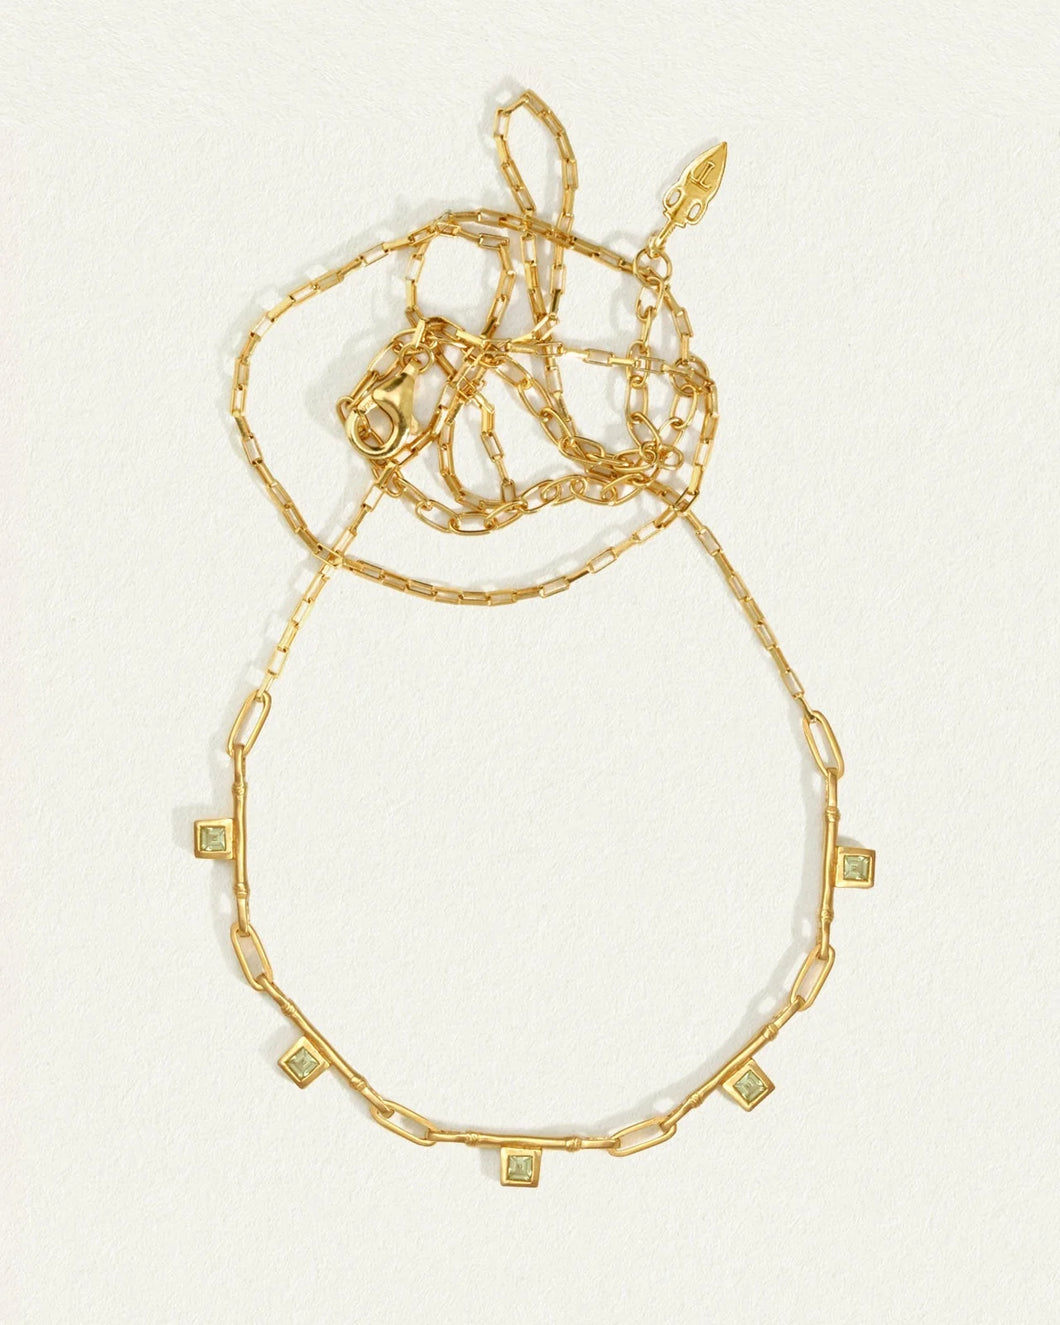 Temple of the Sun - Xanthe Necklace - Gold